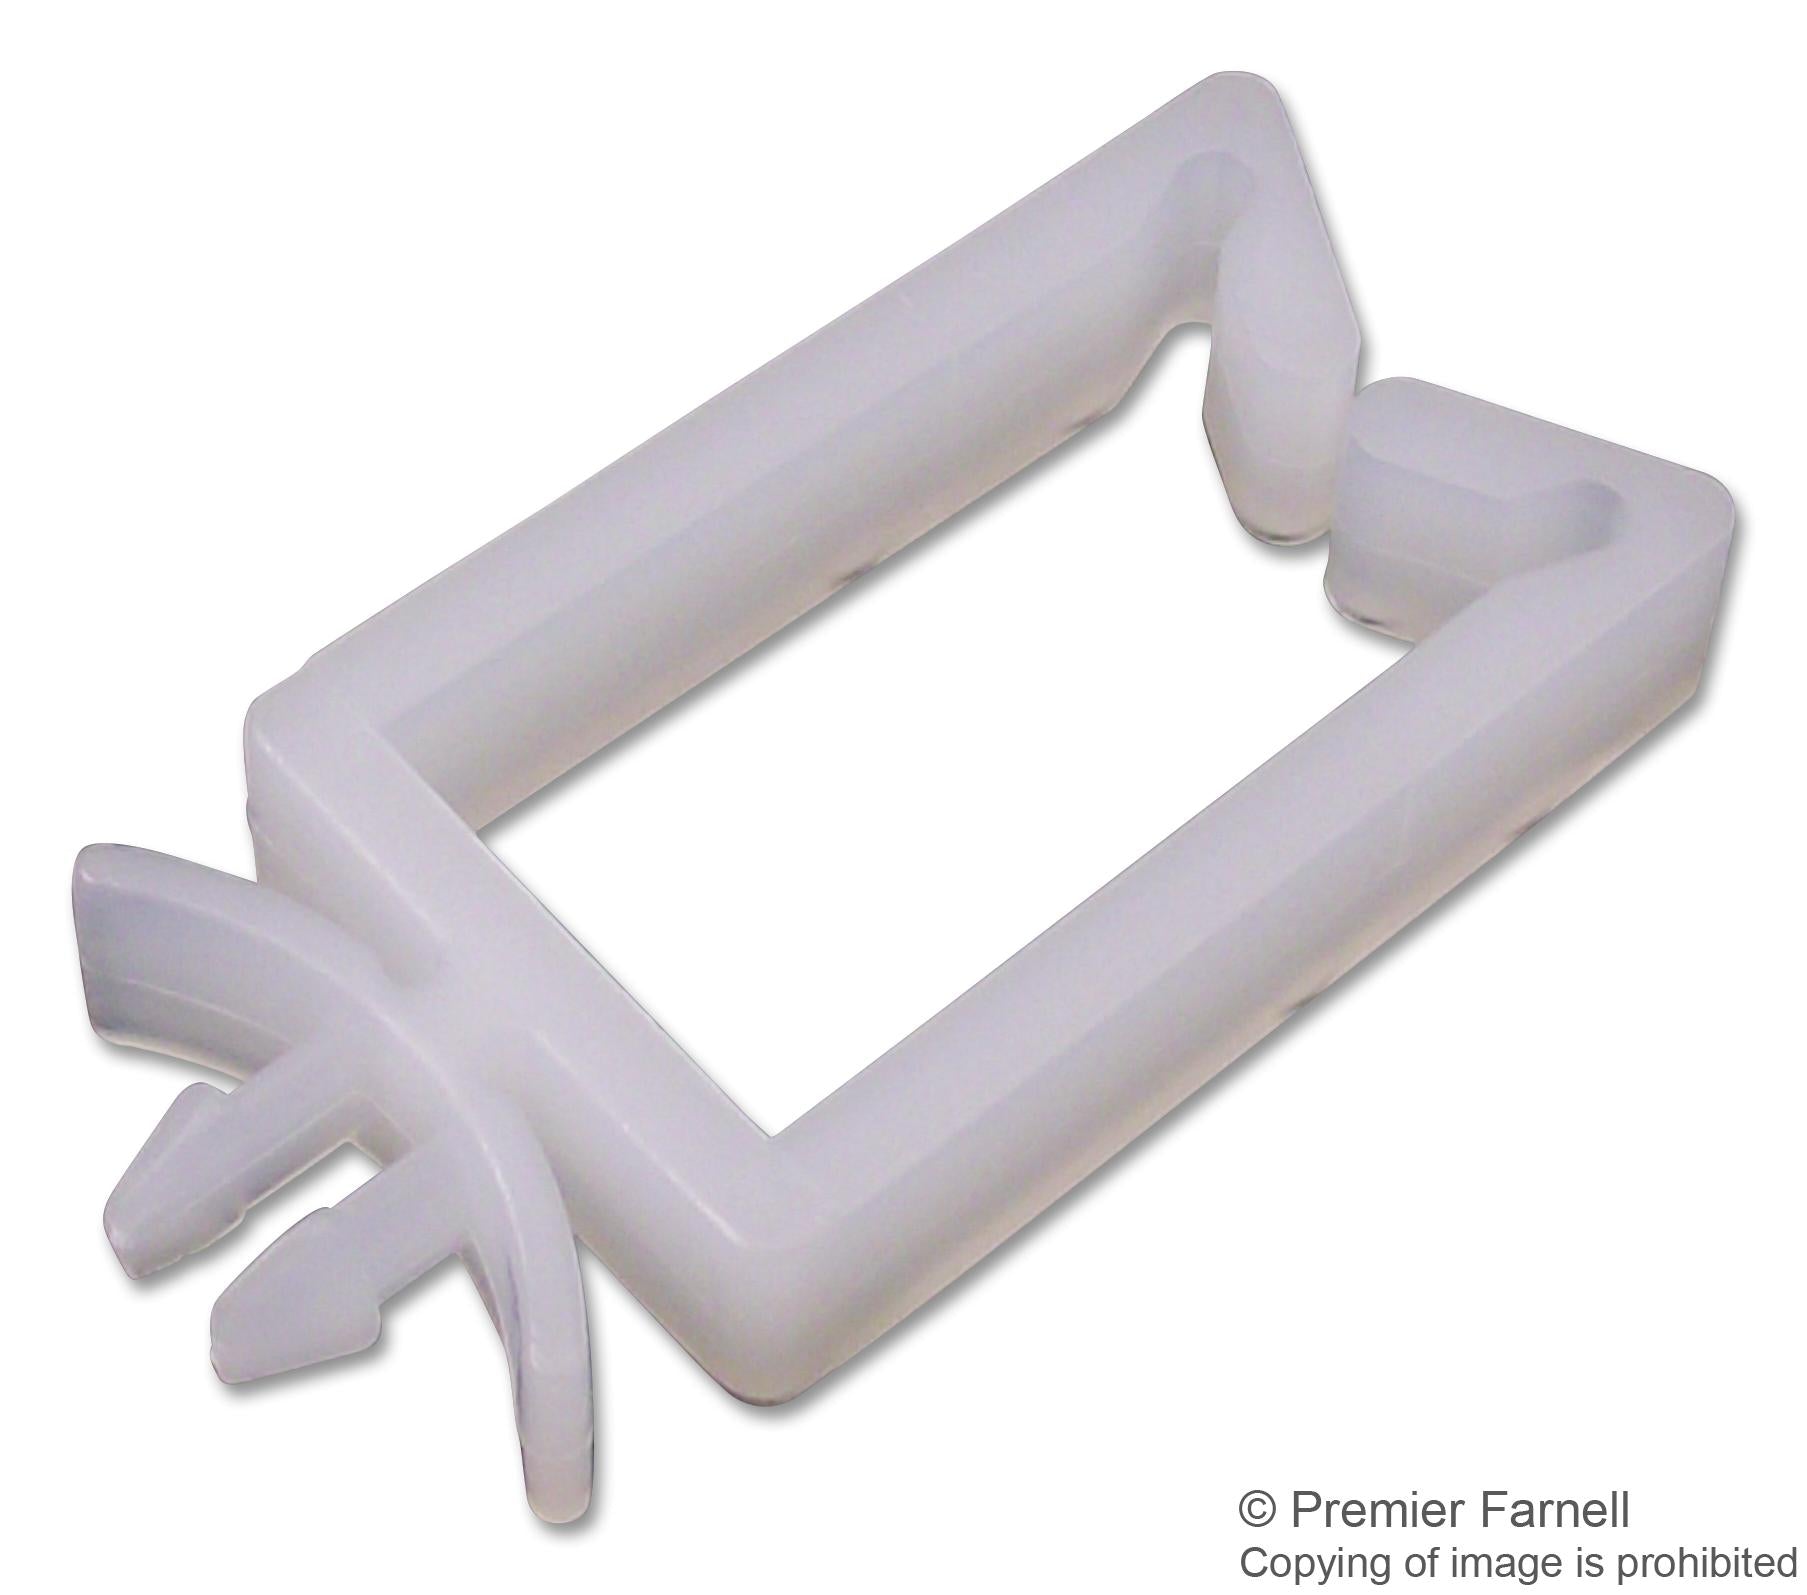 TRWS-A-3-01 CABLE CLAMP, NYLON 6.6, 26.9MM, PK50 TR FASTENINGS